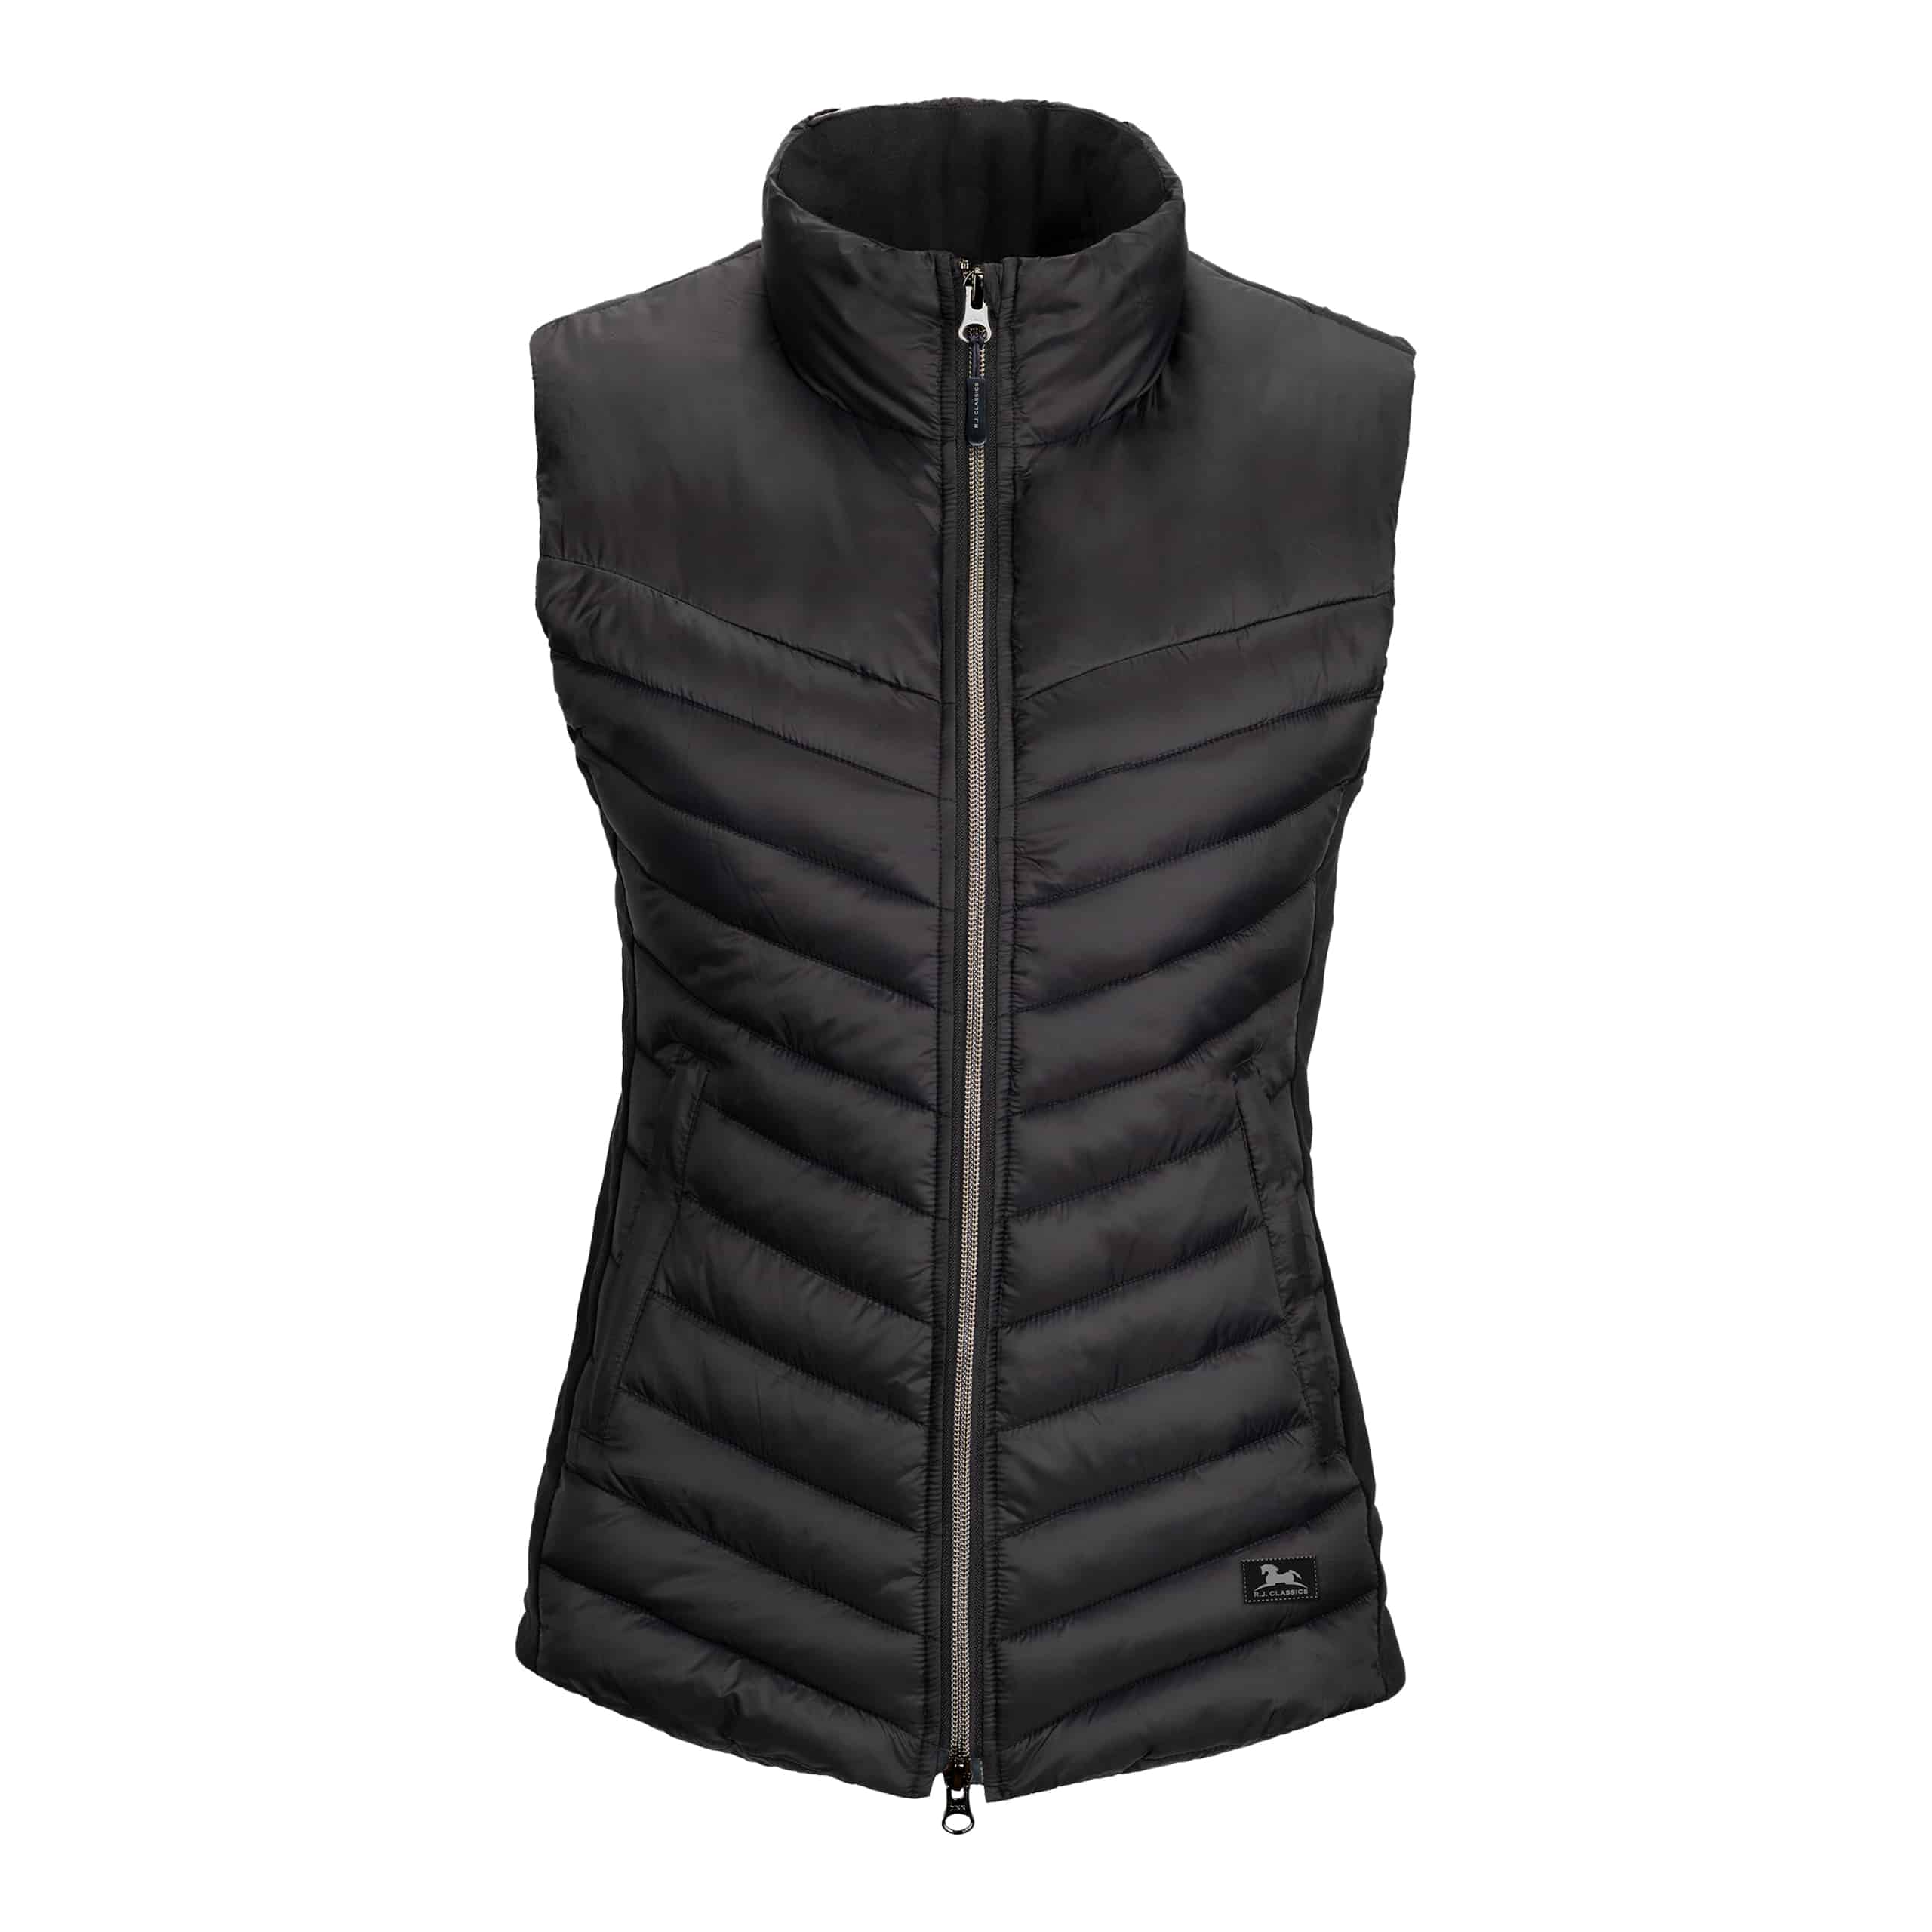 USC Chloe Vest Small / Cardinal and White | Hype and Vice